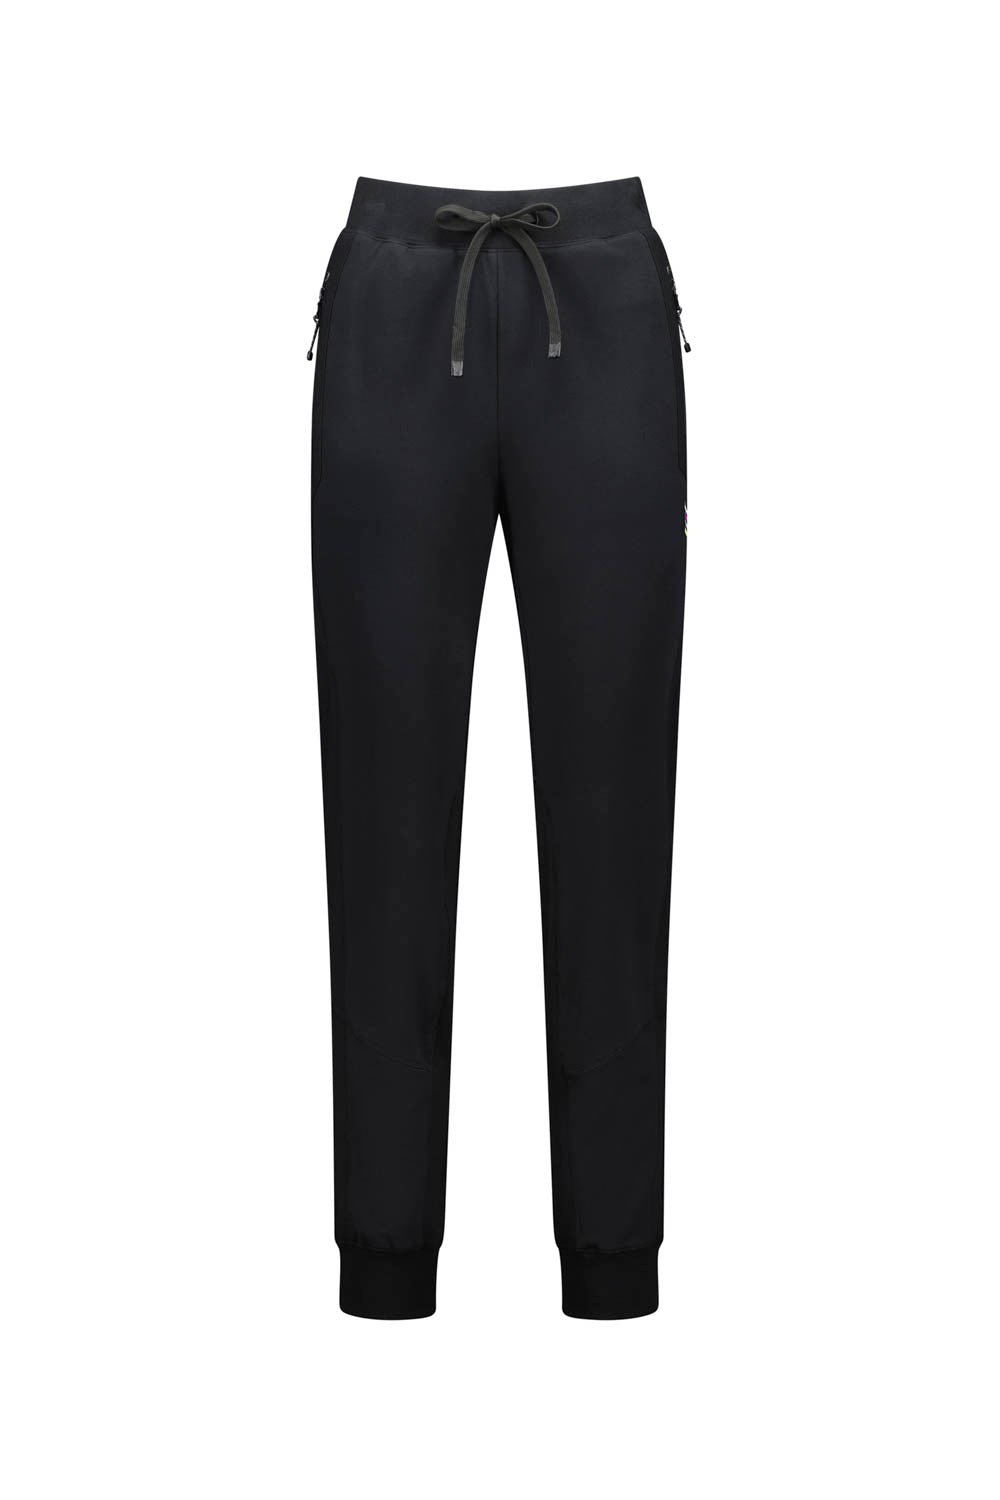 VERGE CULTURED PANT - BLACK - THE VOGUE STORE